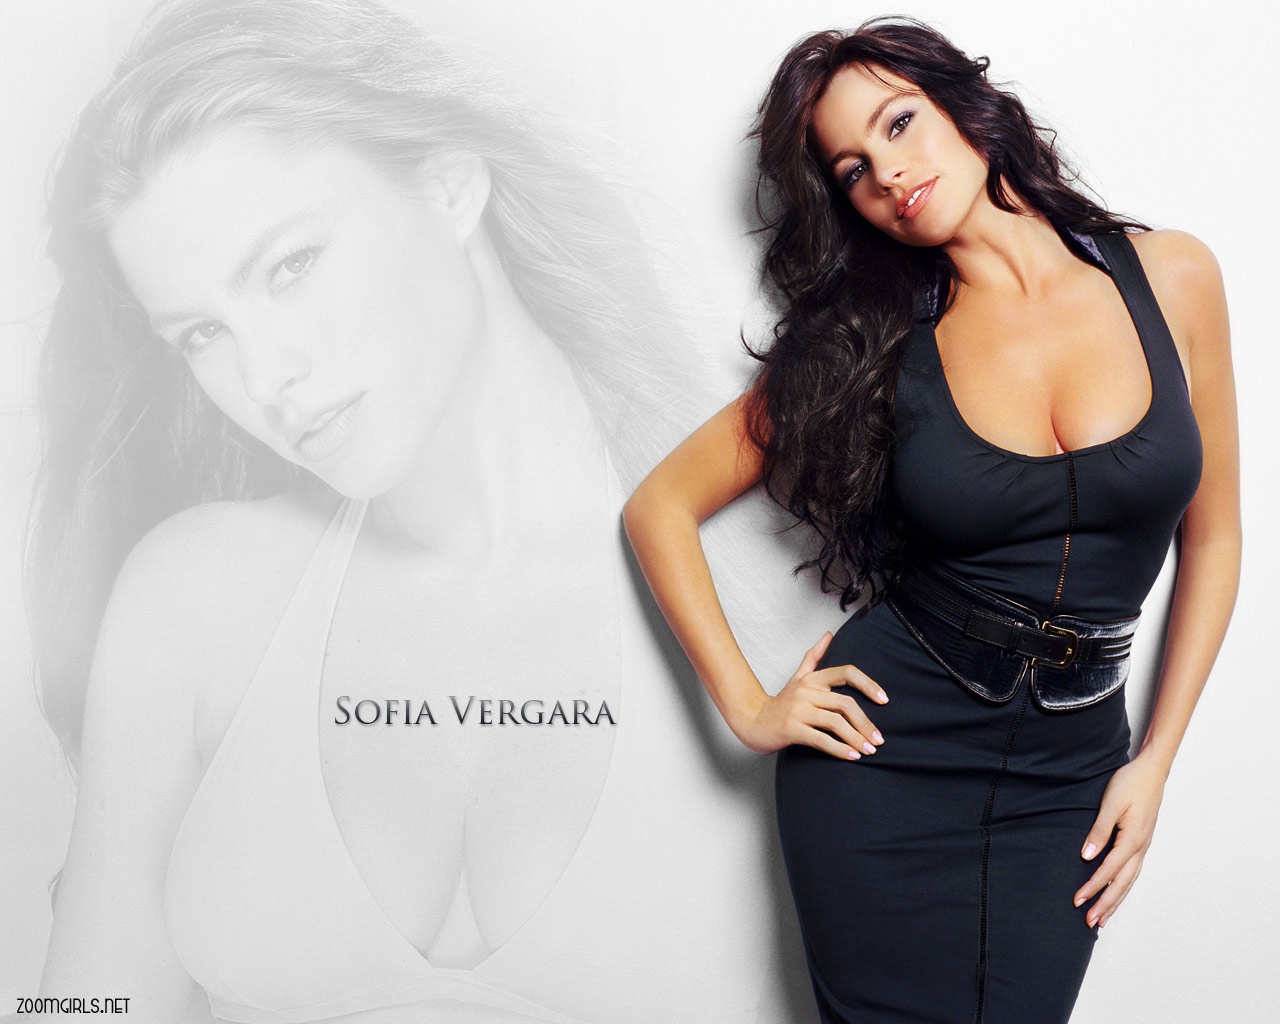 Nudesexyhd - Free download Sofia Vergara 1280x1024 nude sexy hd and wide wallpapers  [1280x1024] for your Desktop, Mobile & Tablet | Explore 73+ Sofia Vergara  Wallpaper | Sofia Vergara Hd Wallpaper, Sofia Vergara Wallpaper